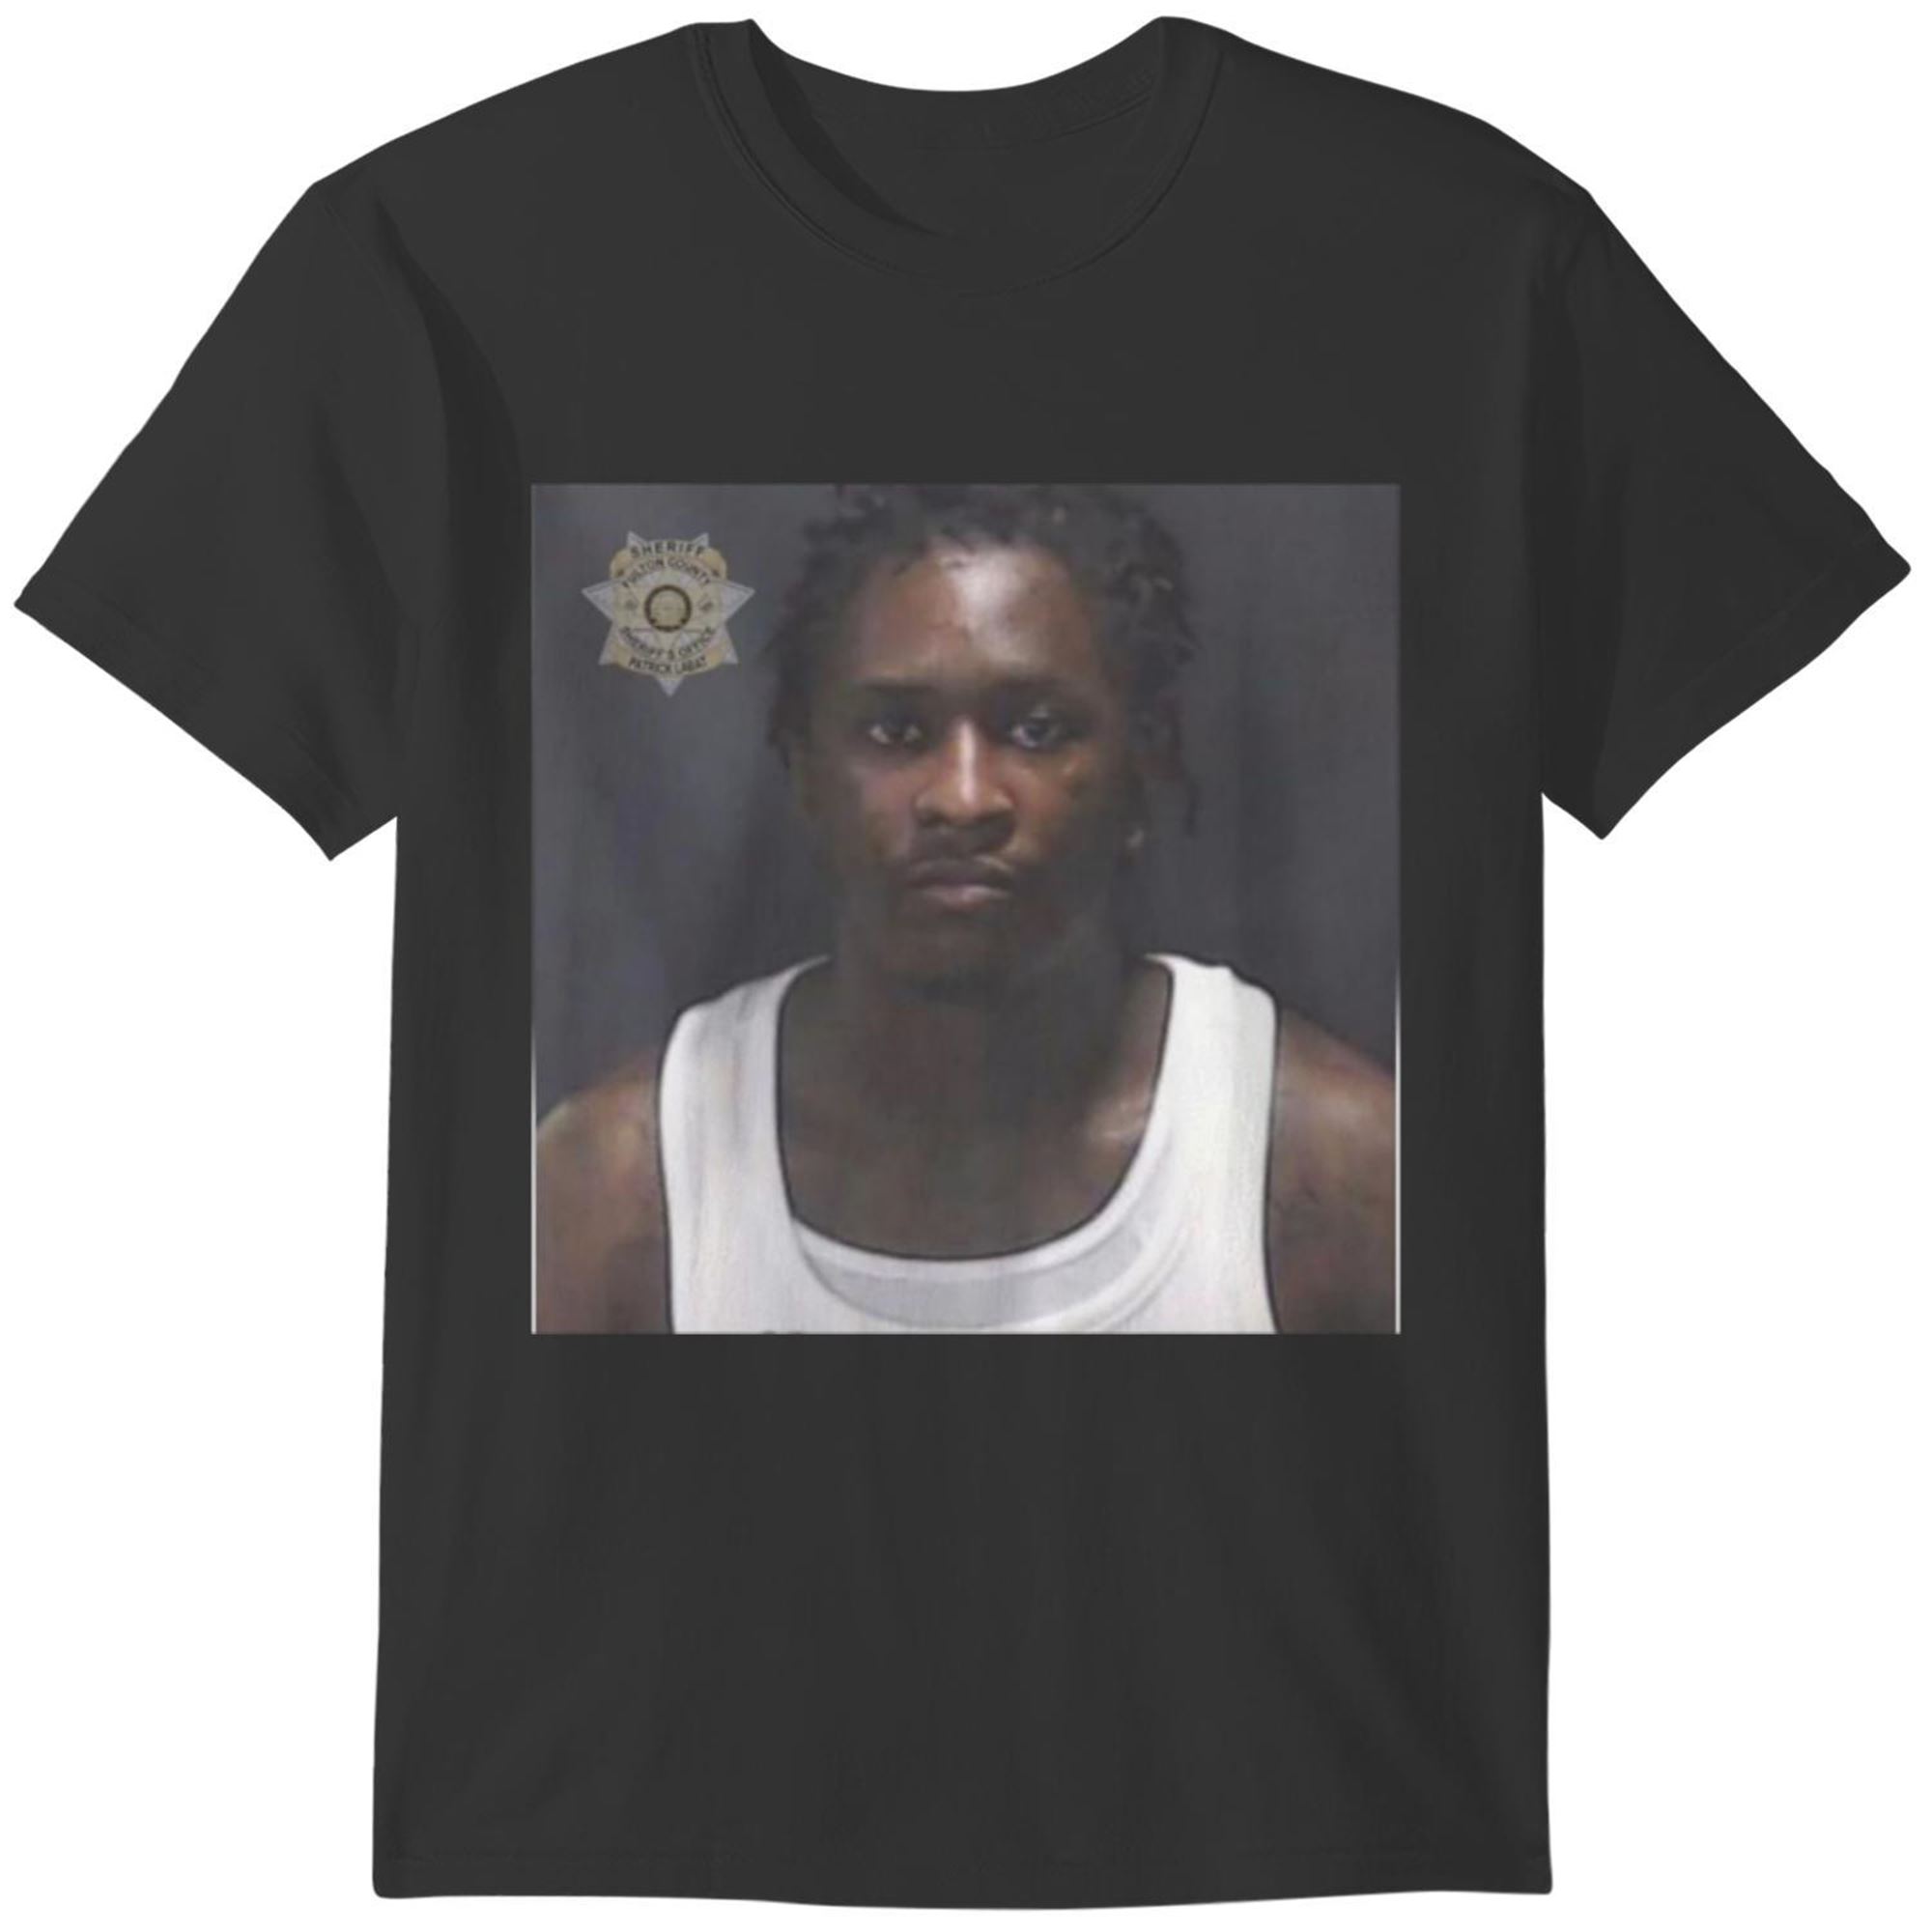 Free Young Thug Rapper Arrested Musician Young Thug Mug Shot Shirt Full Size Up To 5xl